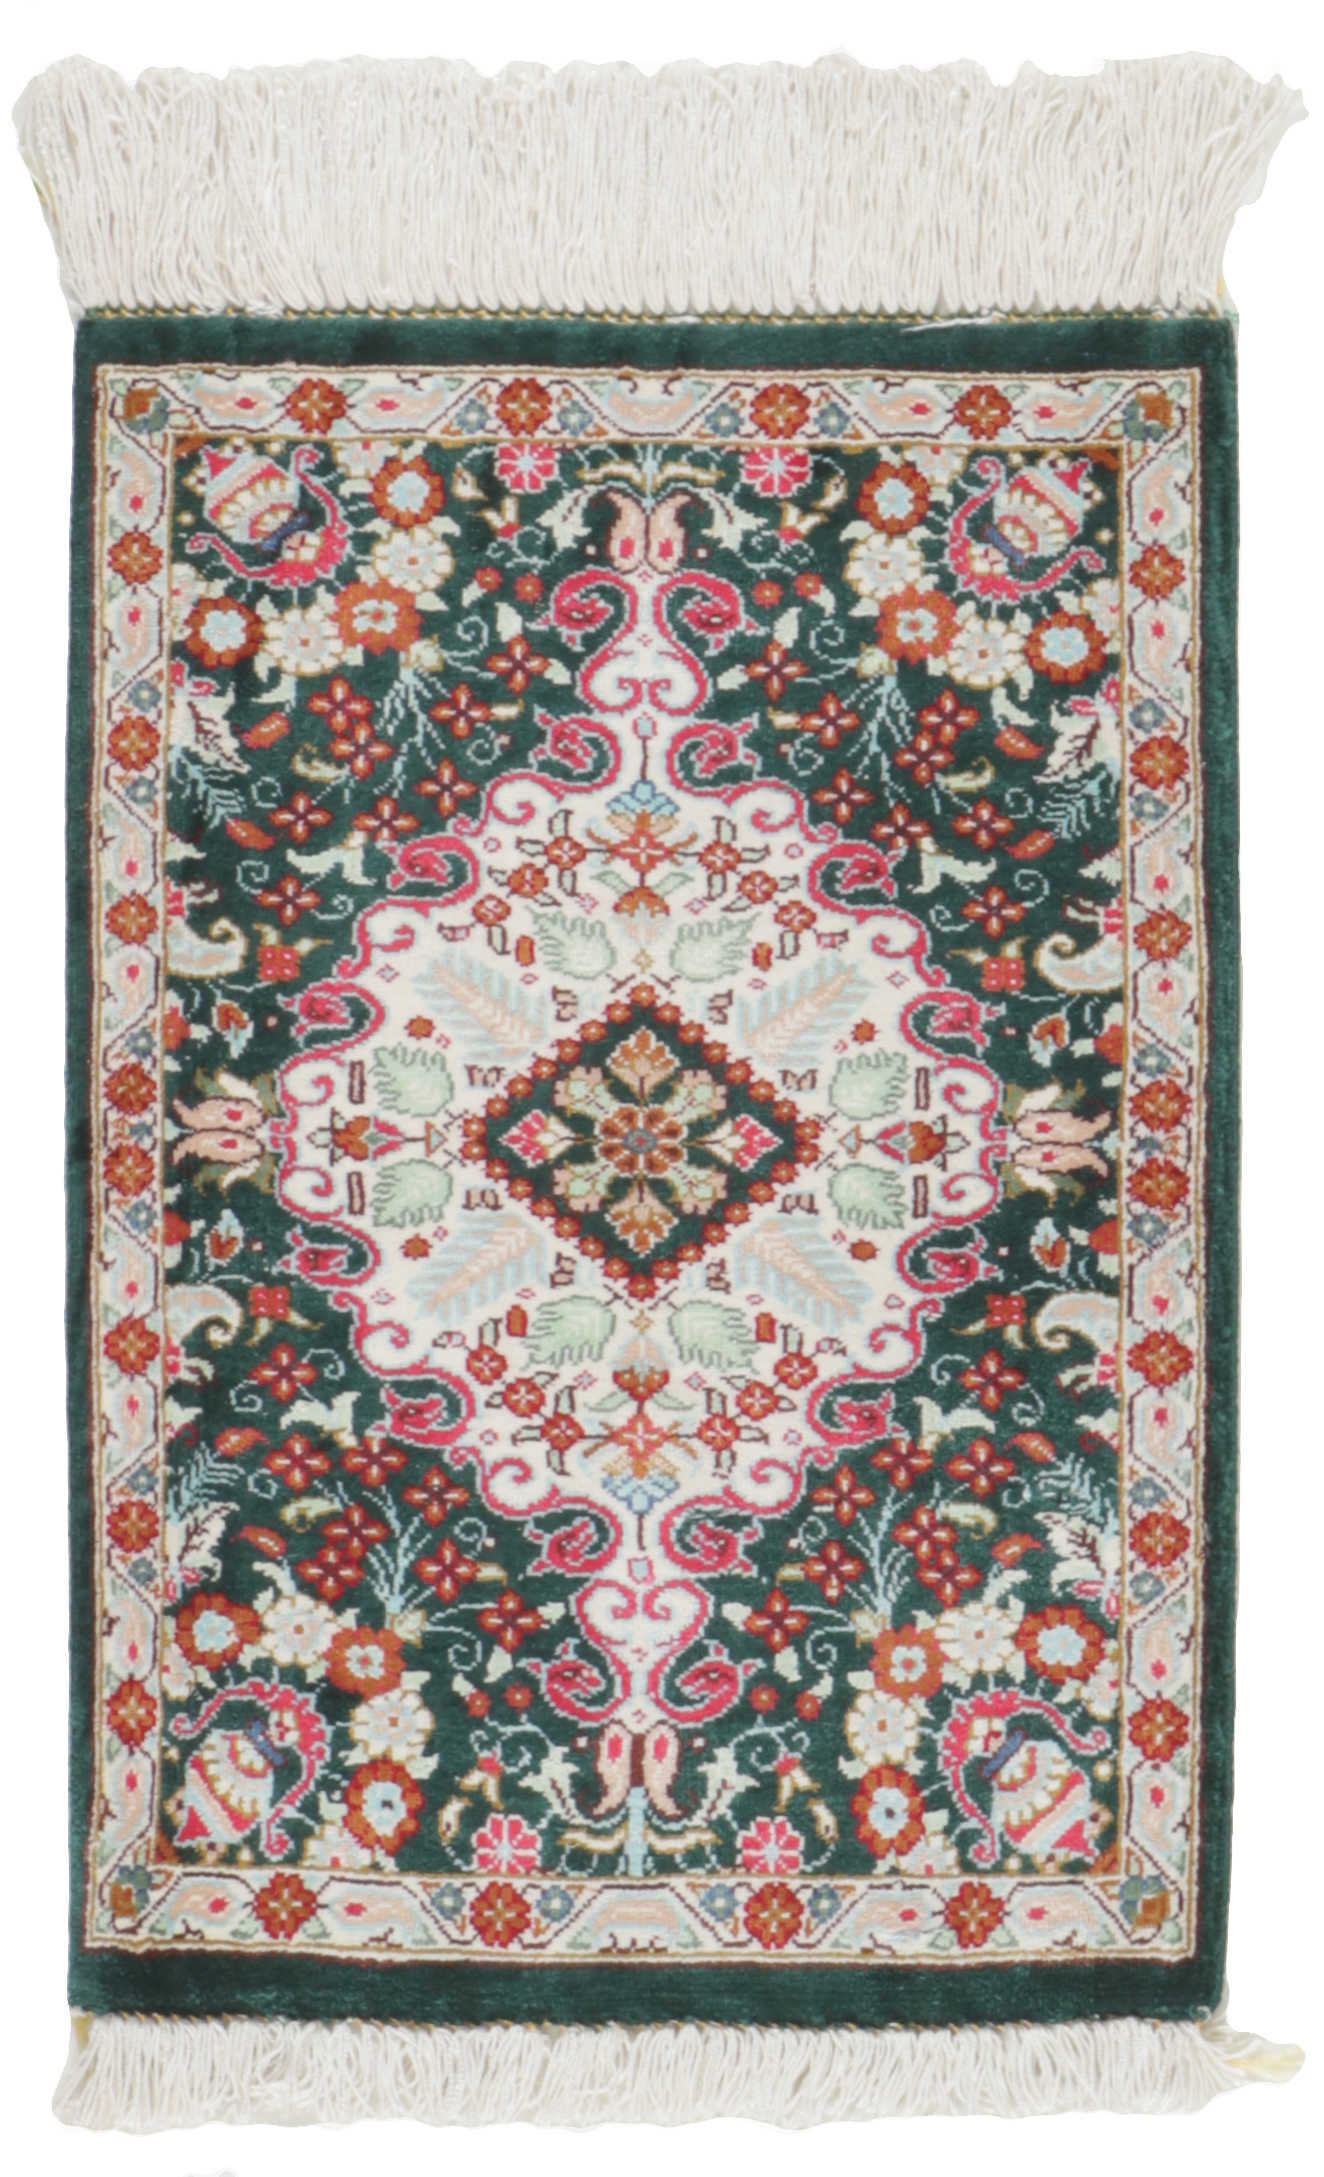 Authentic persian rug with traditional floral design in red and black